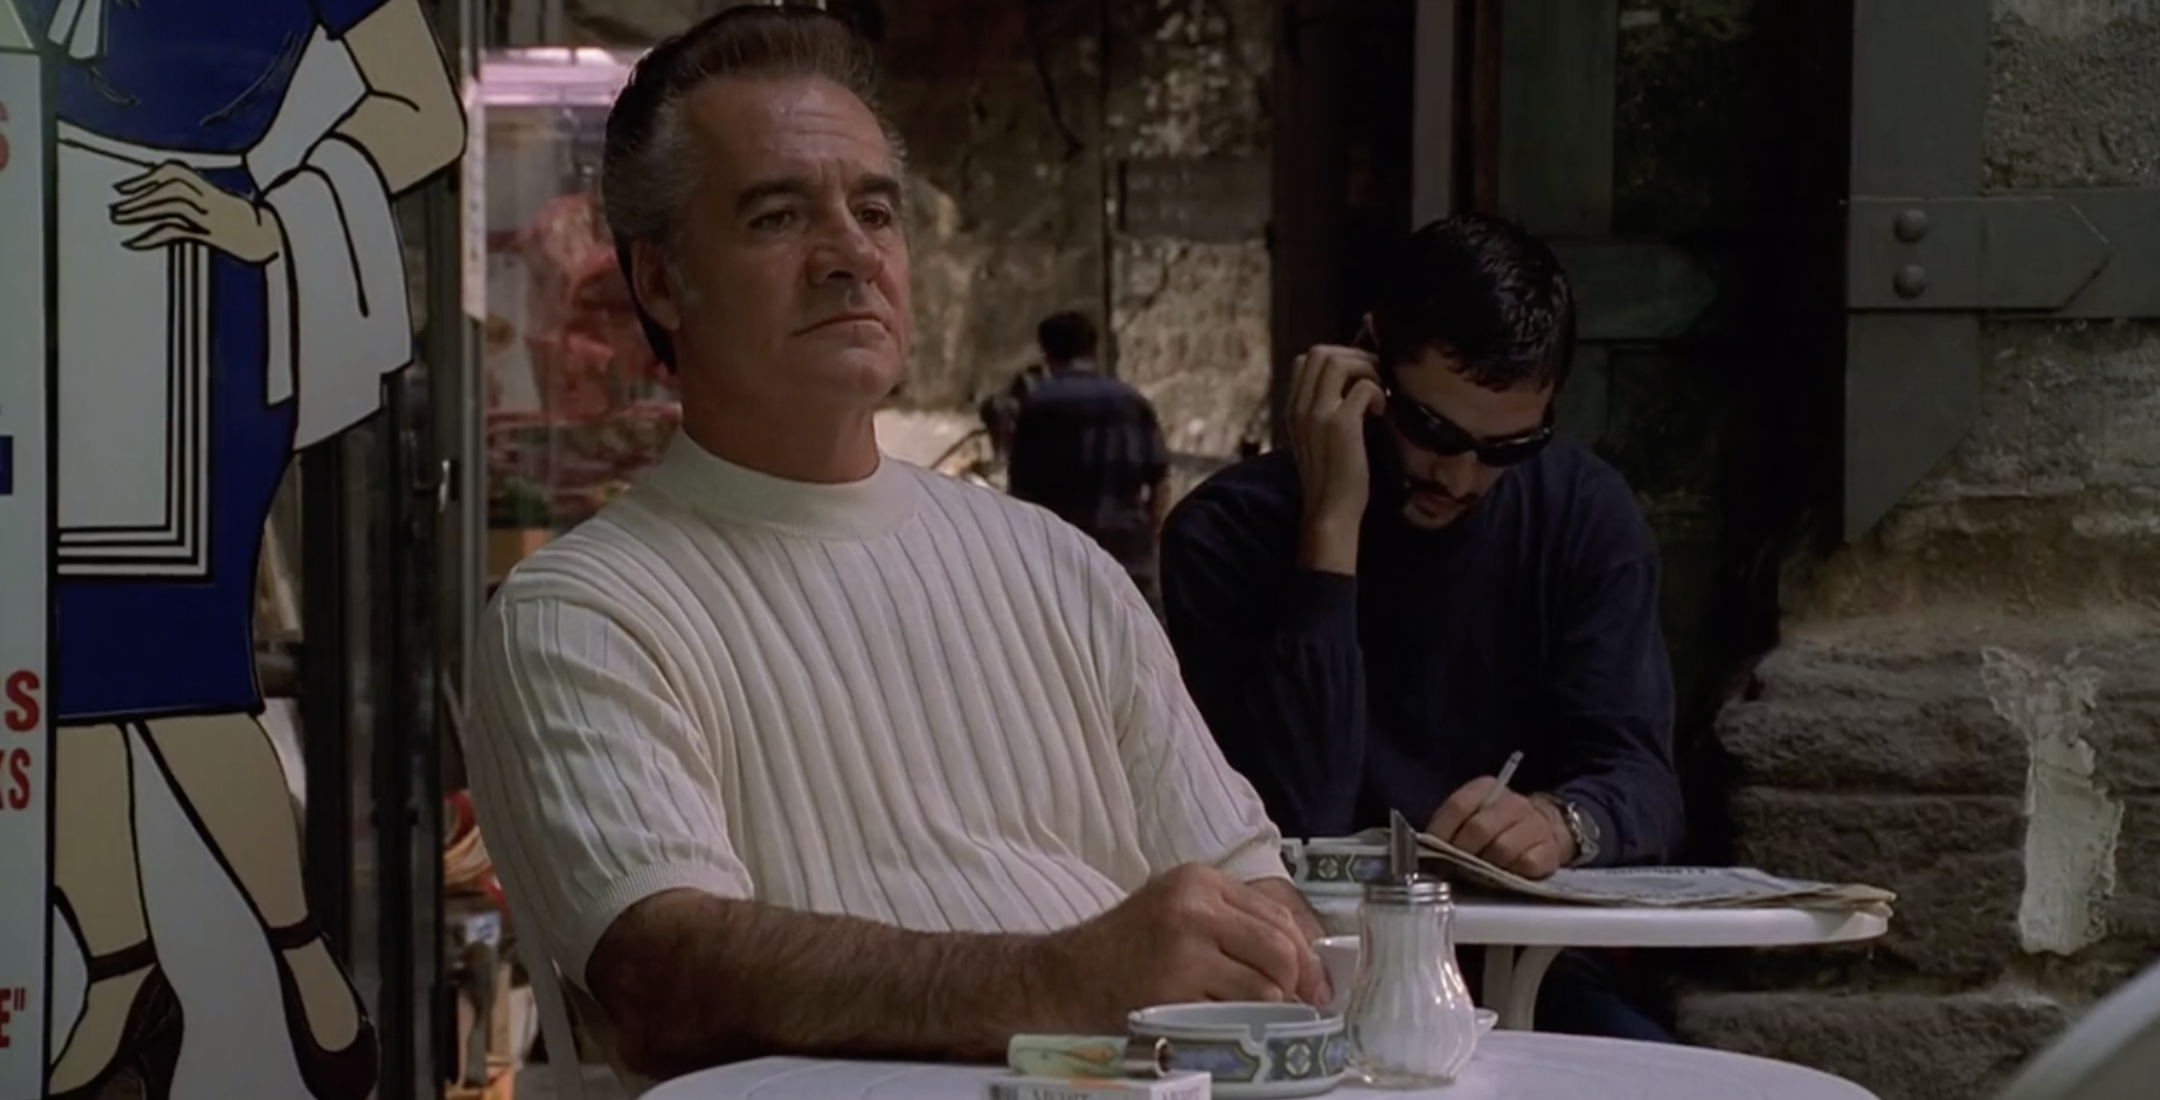 HBO/Entertainment image credit. Image of Paulie sitting at a table in Naples Italy